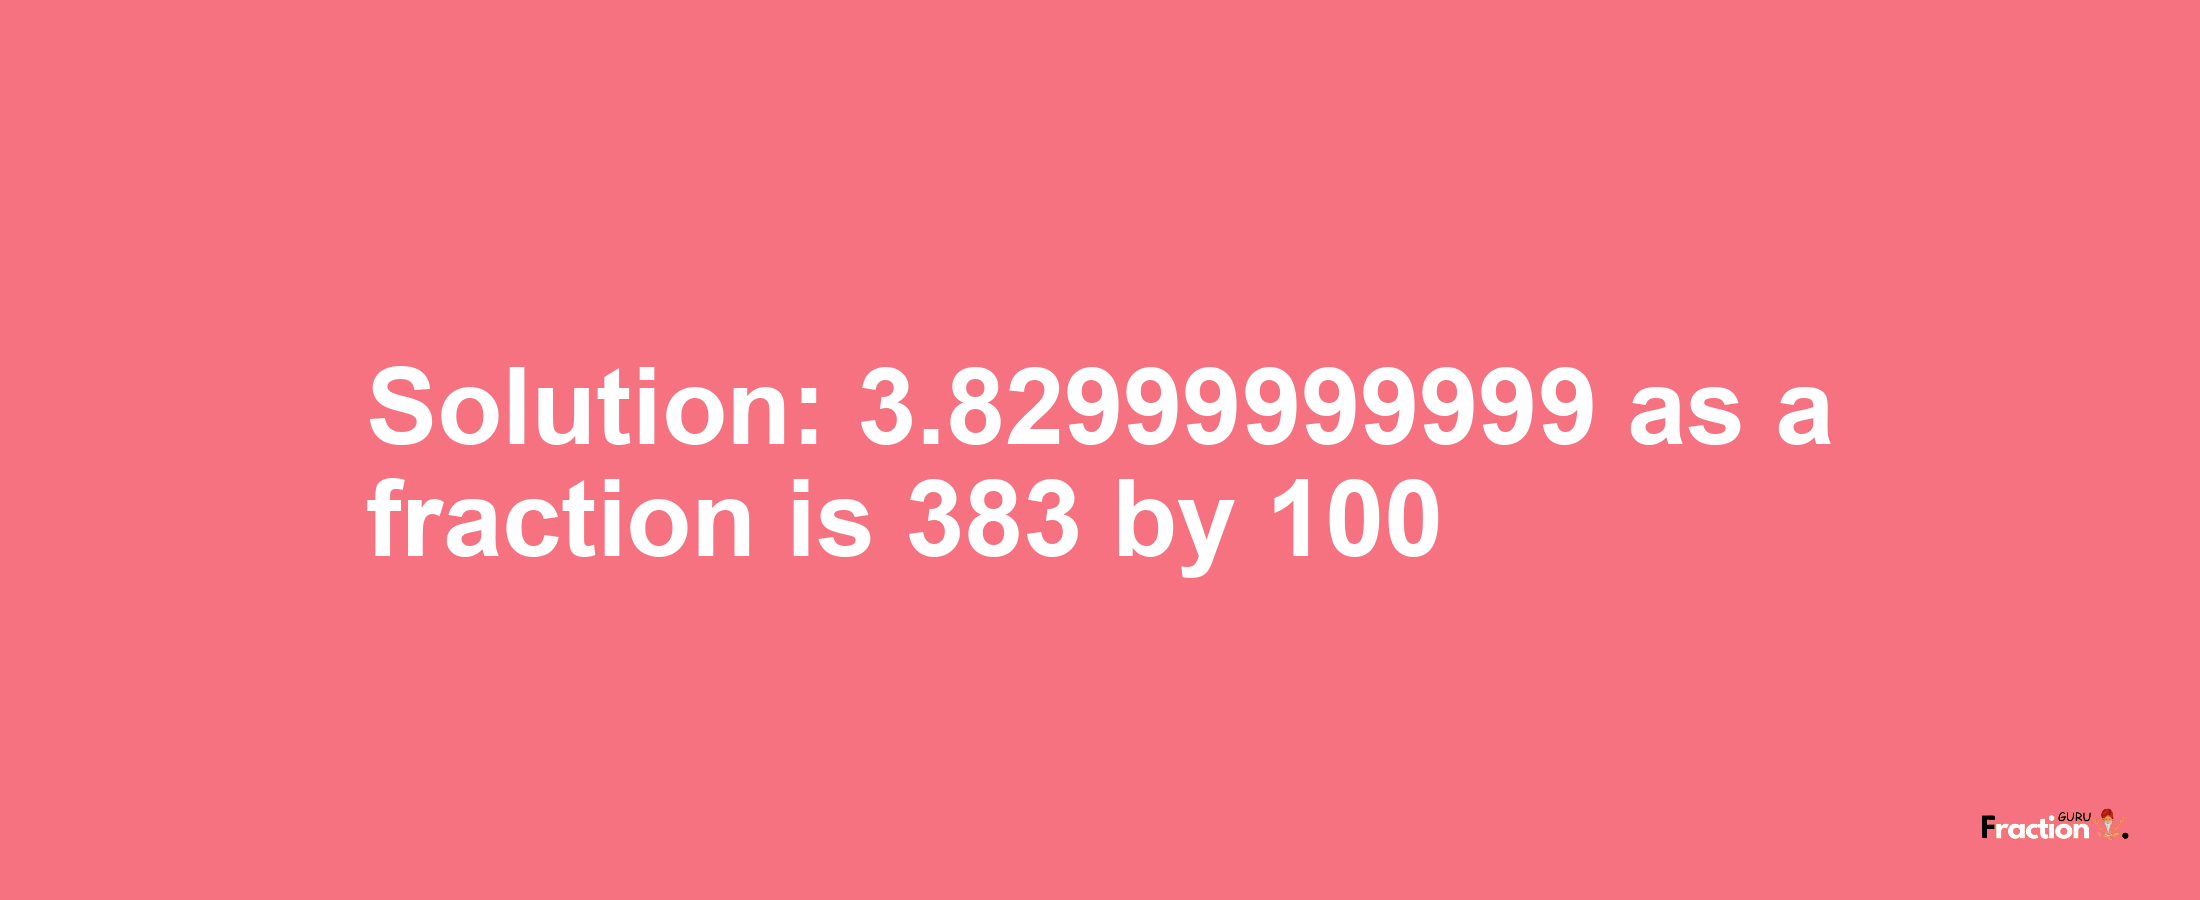 Solution:3.82999999999 as a fraction is 383/100